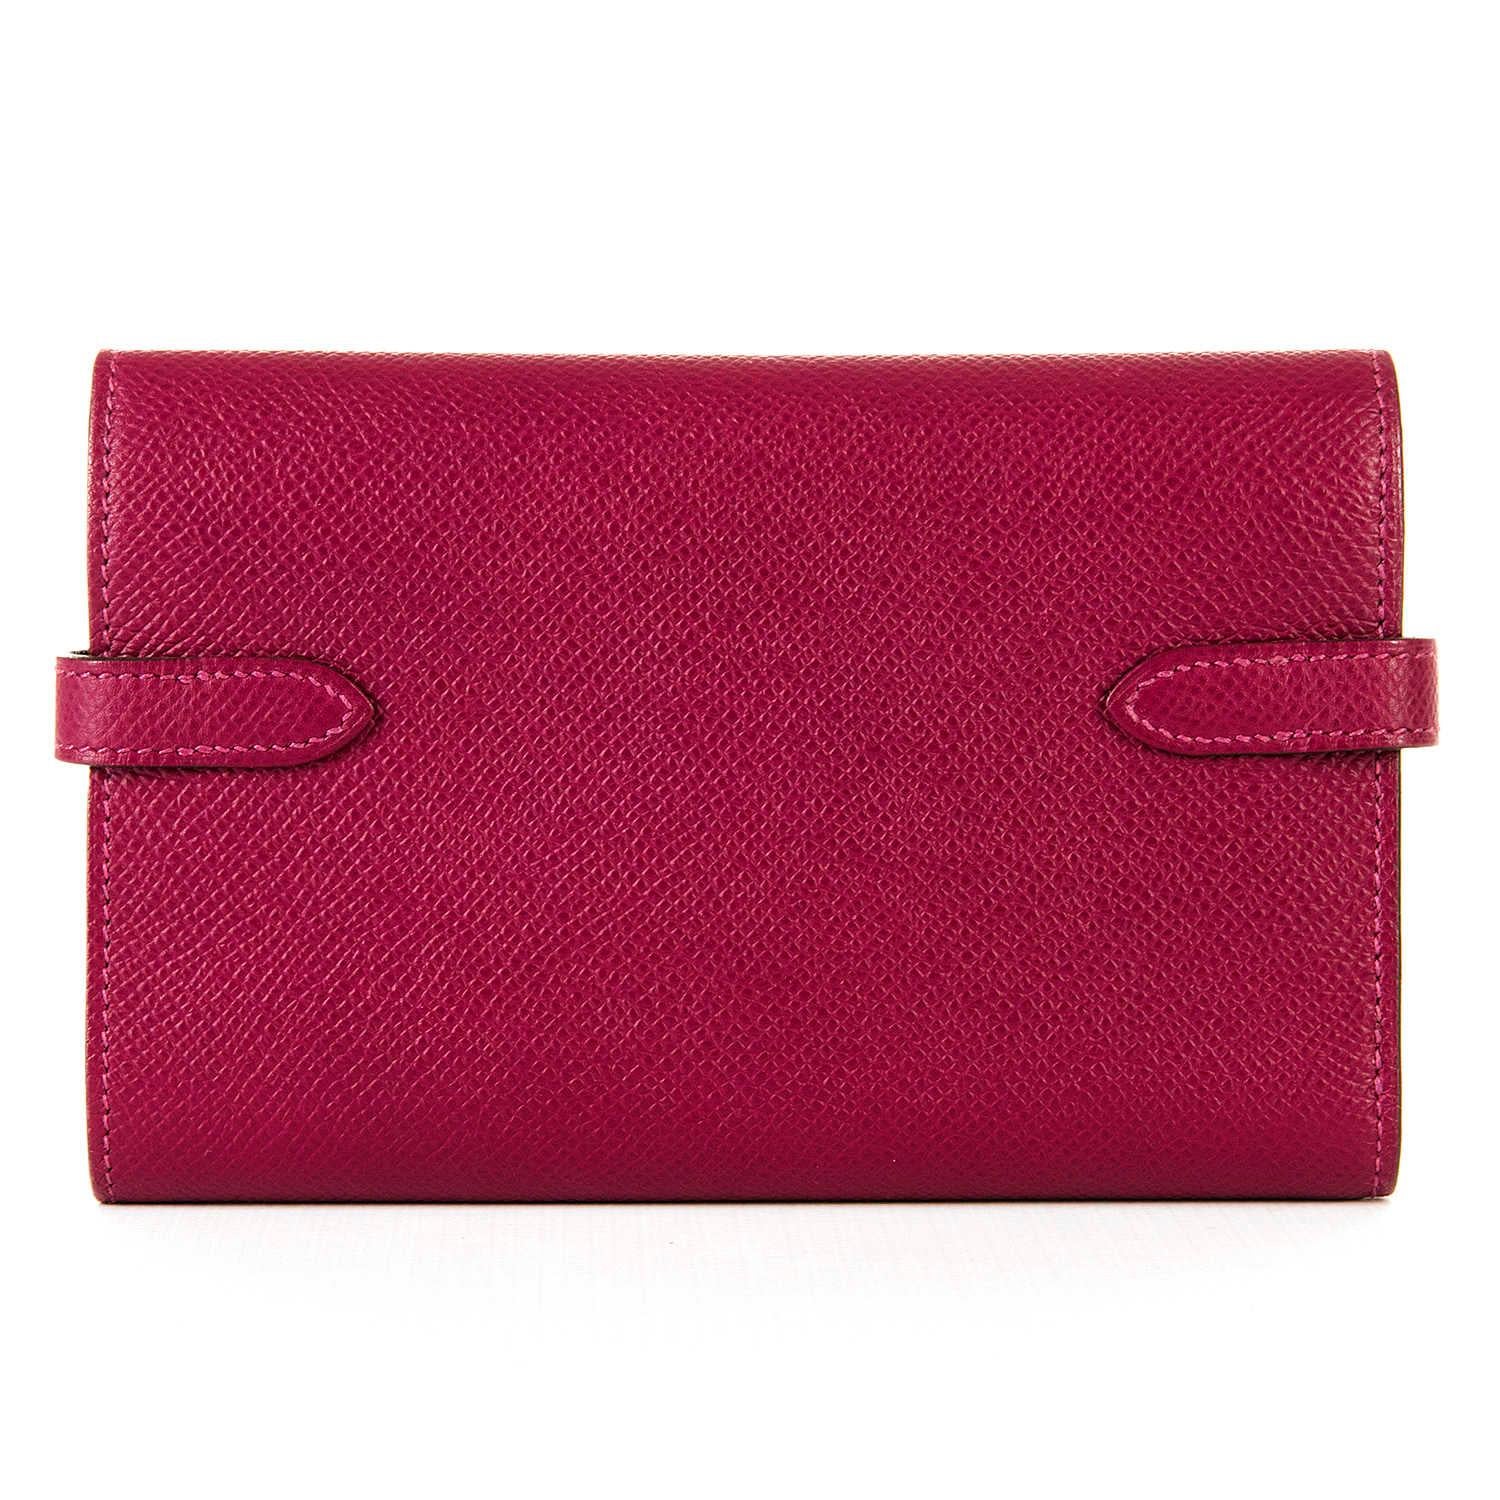 A fabulous Hermes 'Special Order' colour, Kelly Epsom Leather Wallet. In pristine 'Store-fresh' condition the Wallet is finished in 'Tosca' beautifully accented with silver Palladium hardware. The interior  also in matching Epsom leather, has a